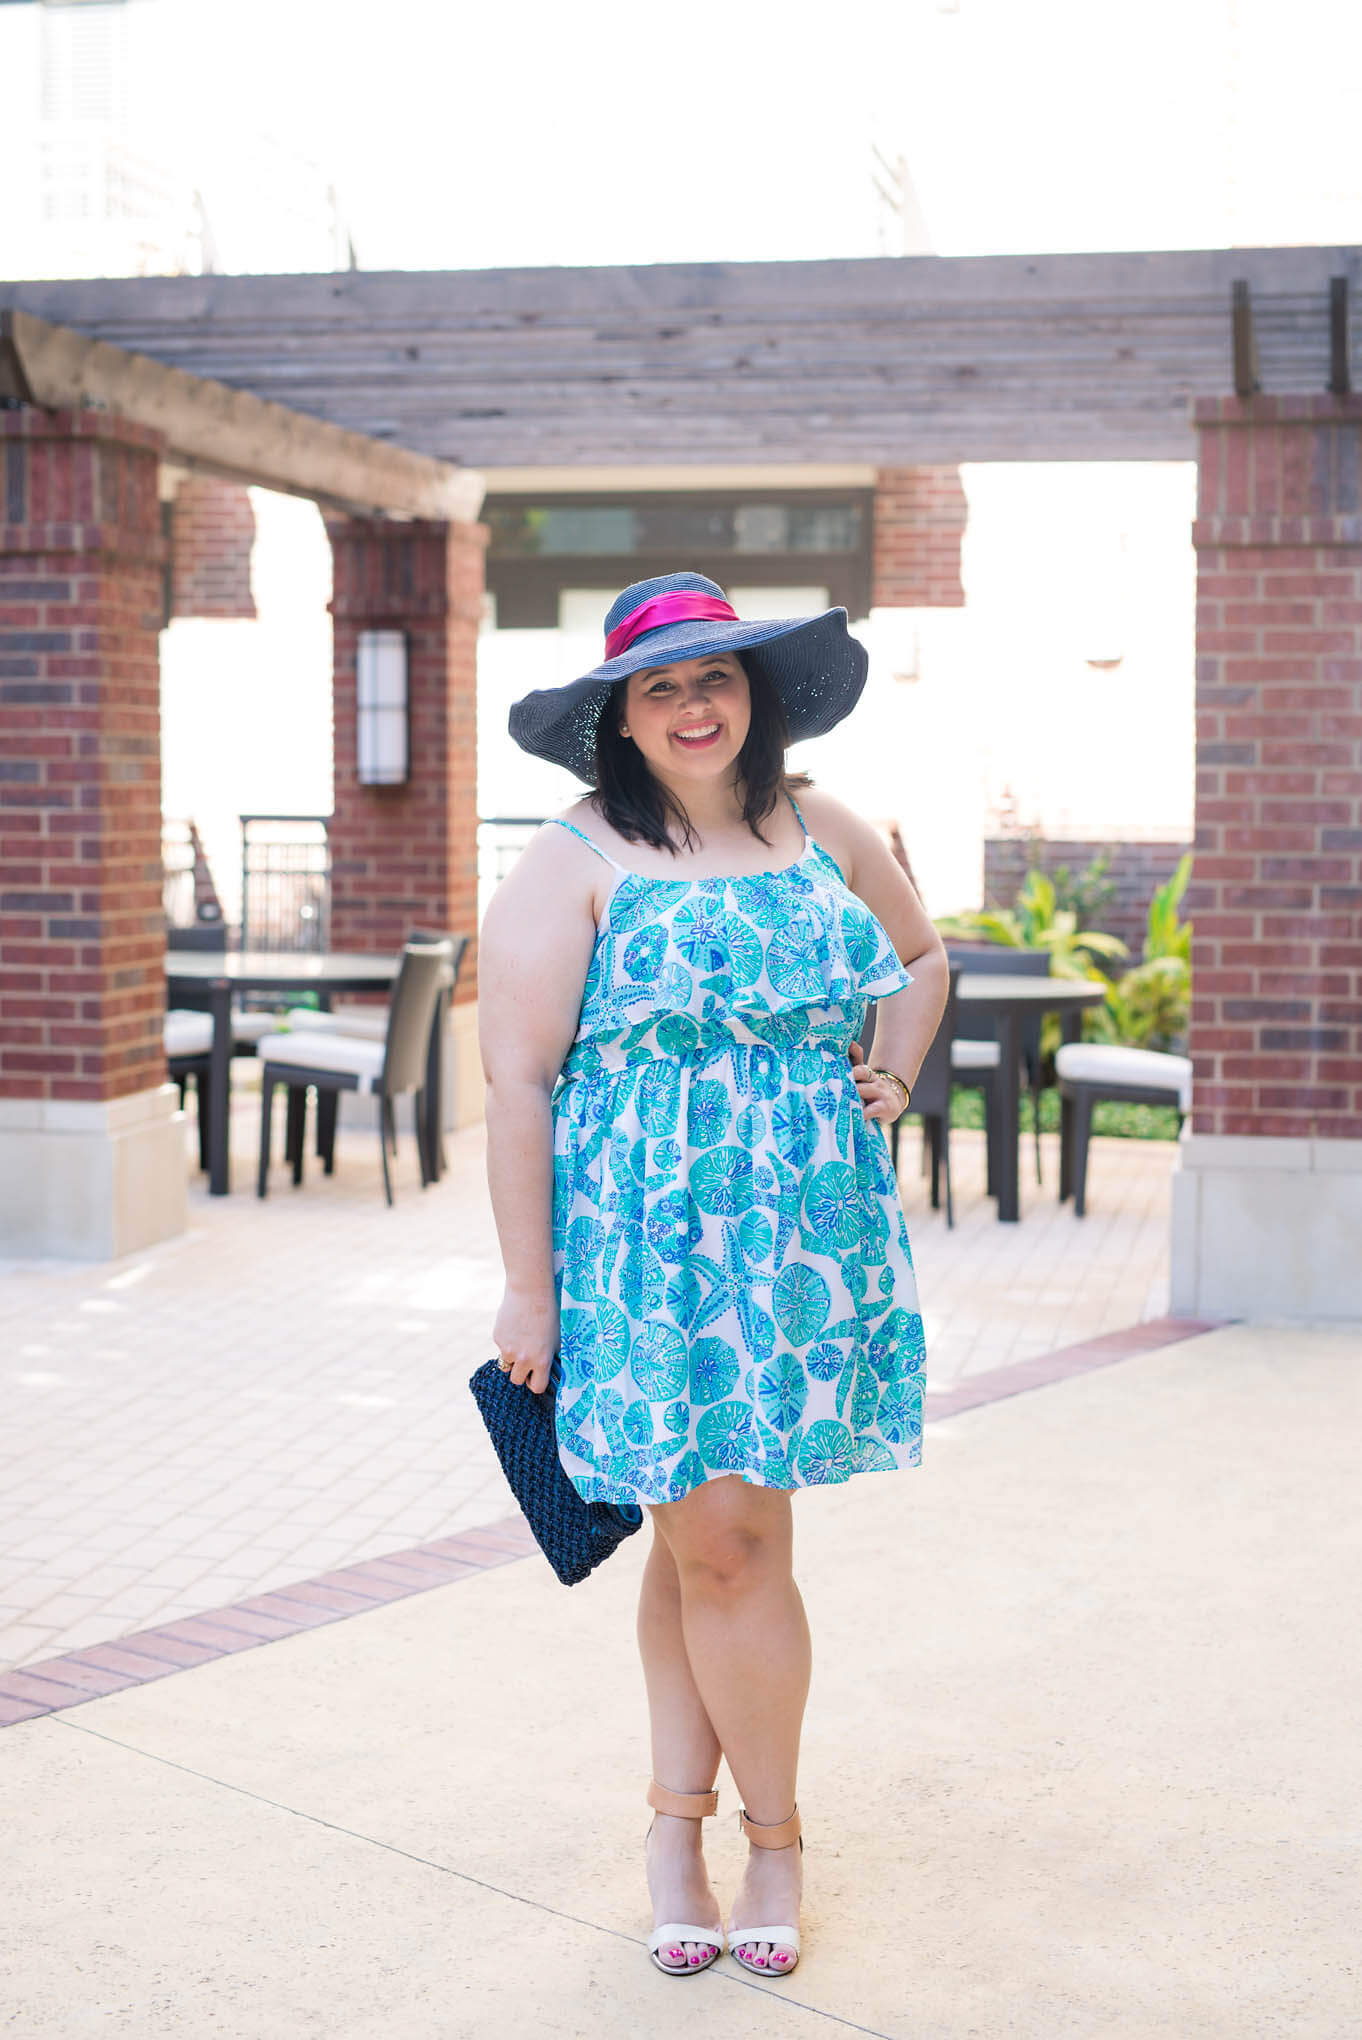 Kentucky Derby Attire - Something Gold, Something Blue fashion blog - What to wear to the Kentucky Derby, What to wear to a kentucky derby party, Lilly pulitzer, Marley Lilly hat, Sam Edelman Shoes